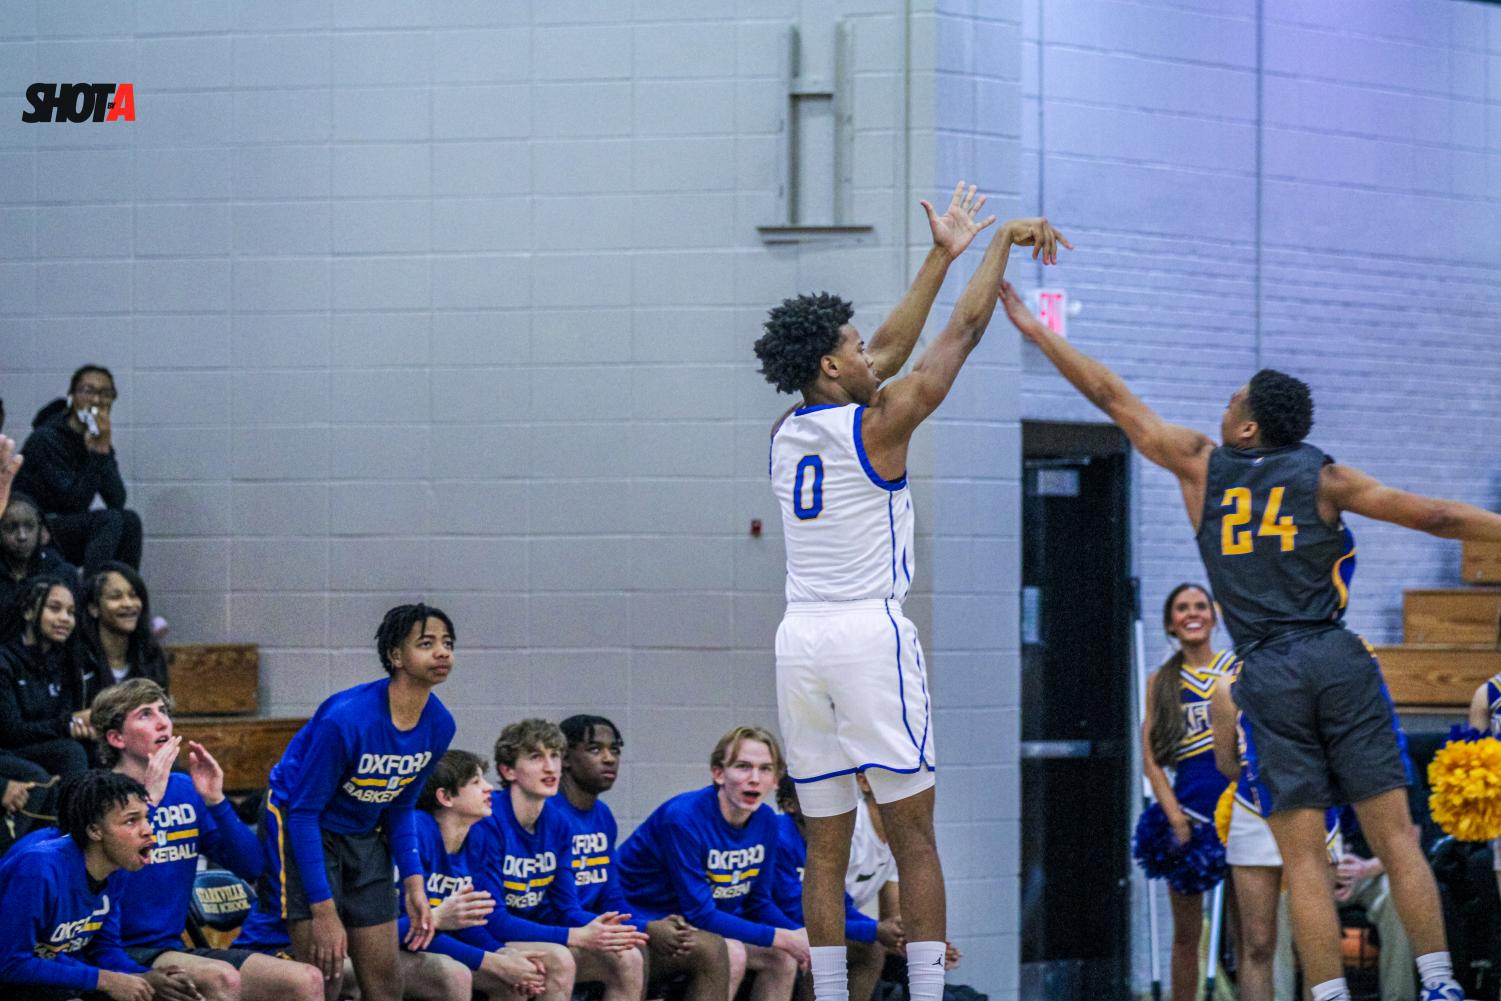 Tupelo+Defeats+Oxford+65-37+in++First+Round+Of+The+1-6A+Division+Tournament.